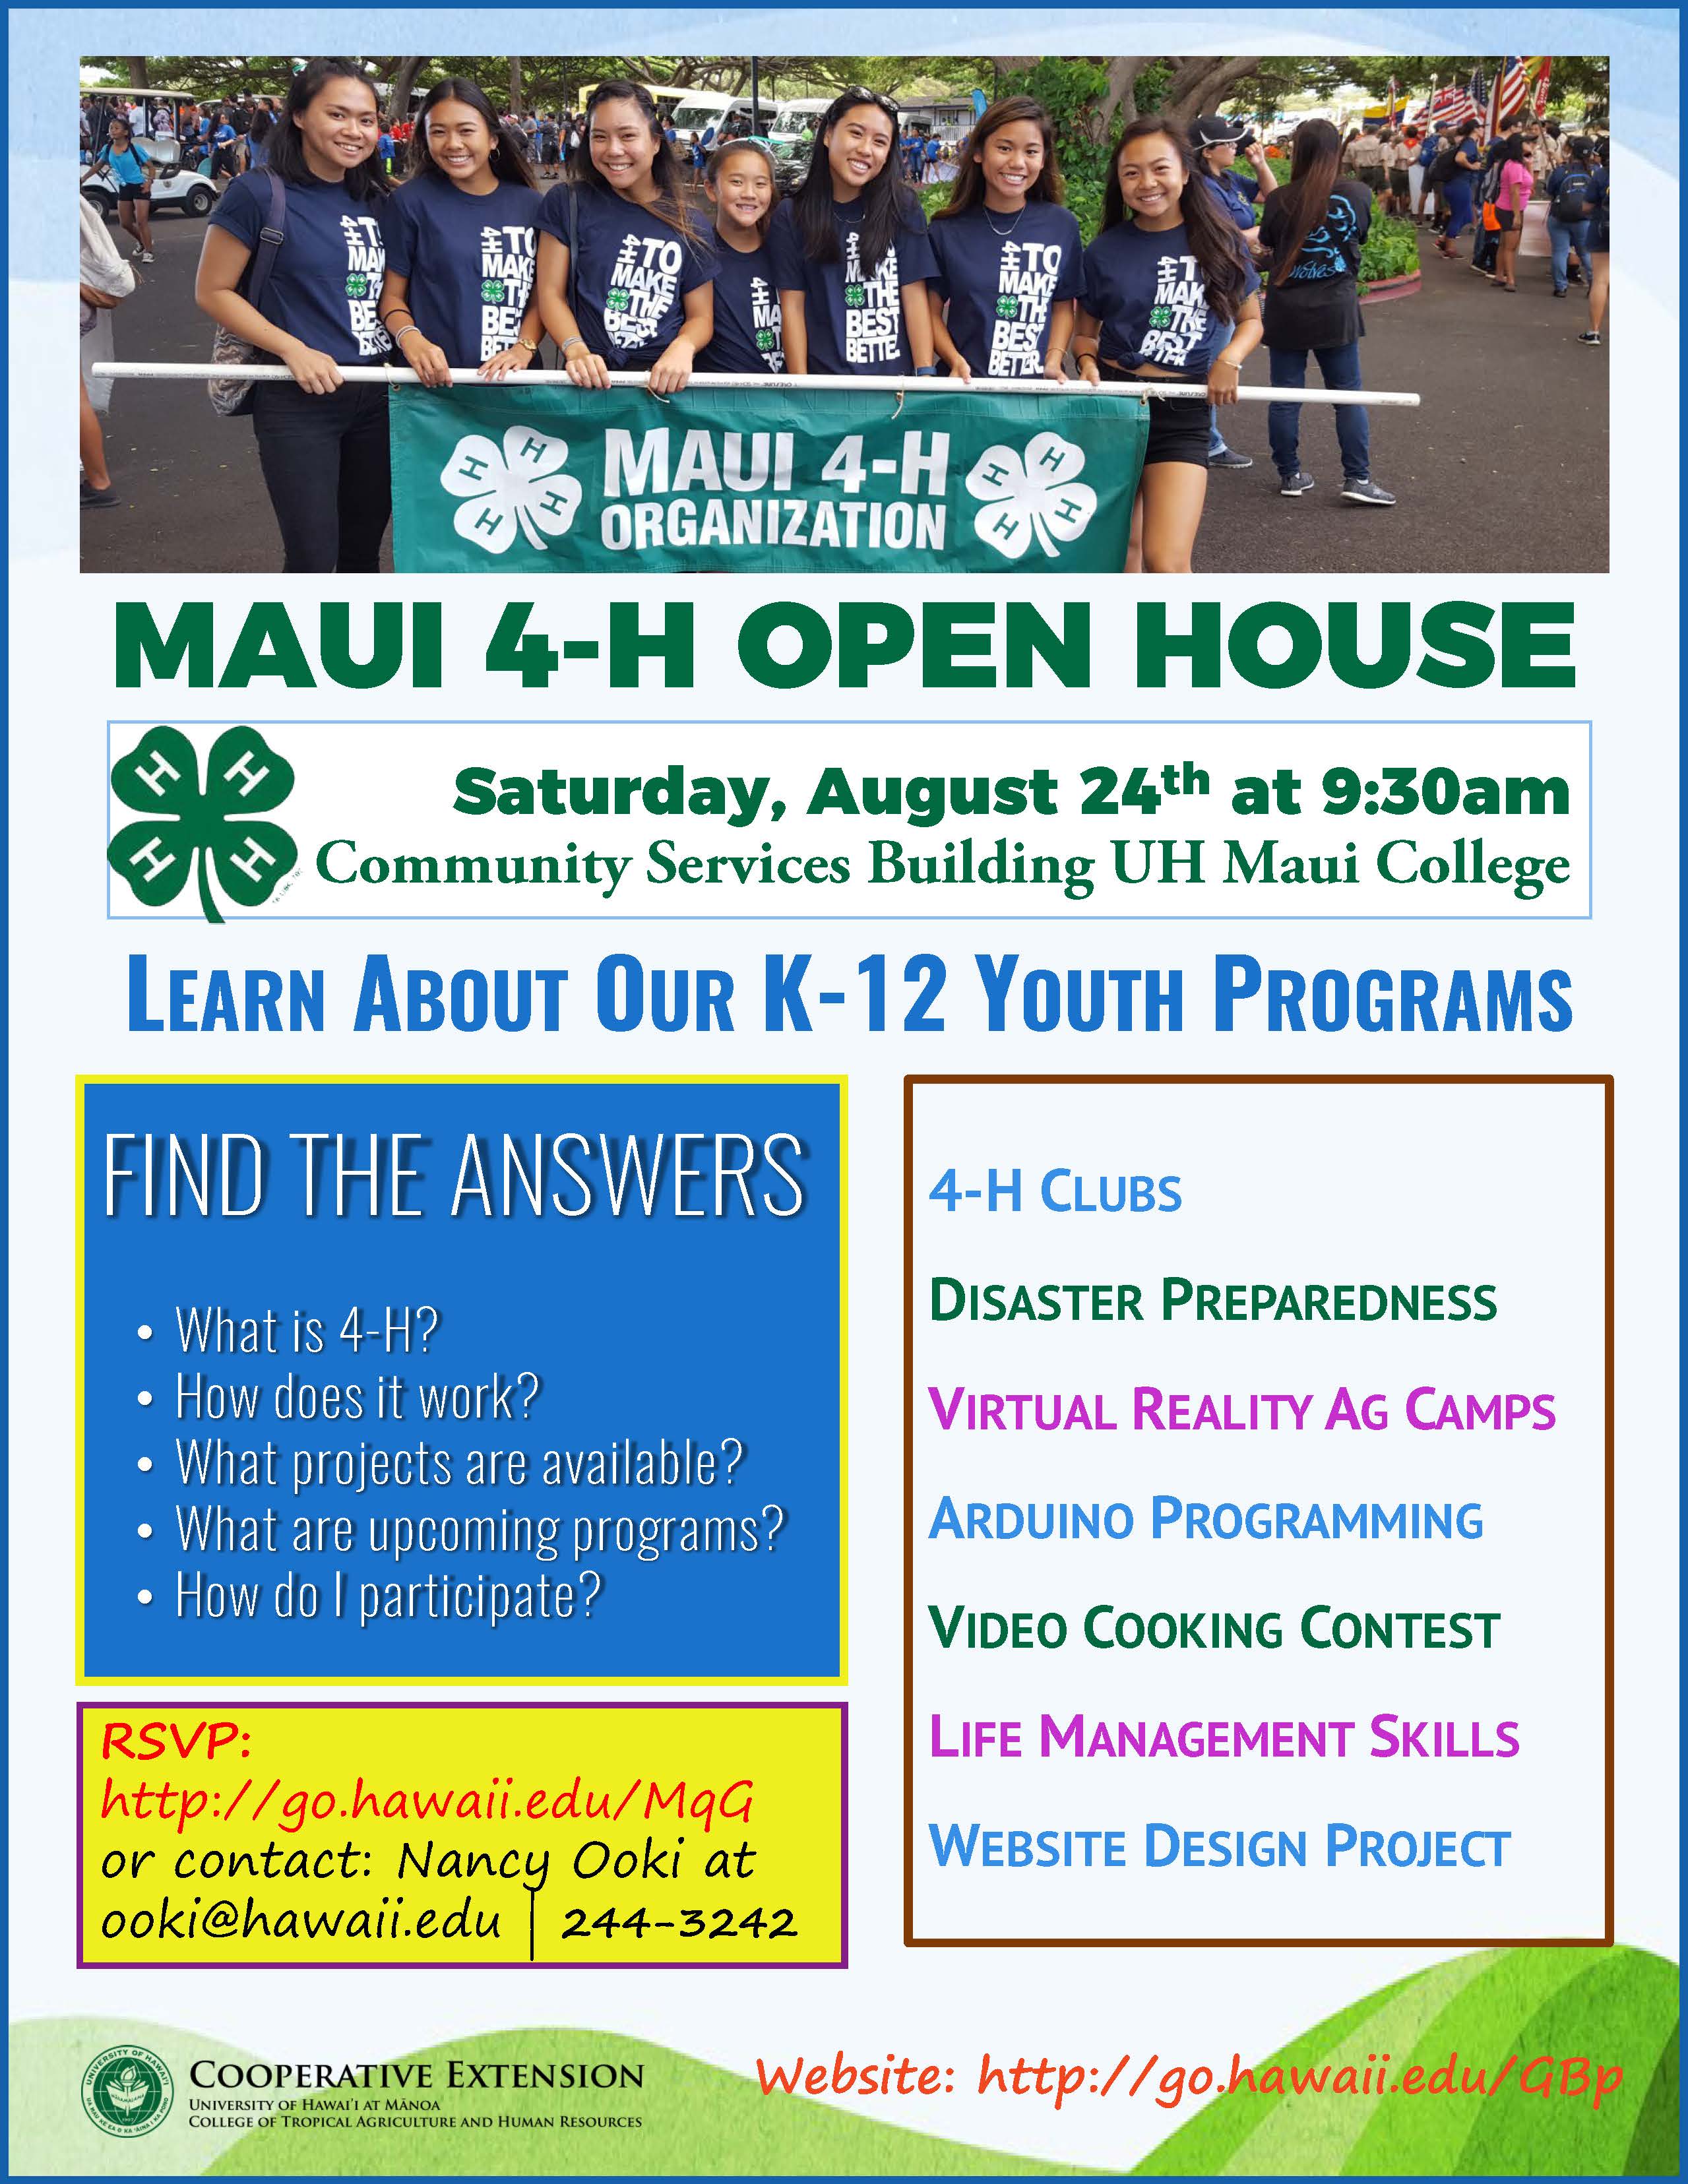 Information on 4-H Open House